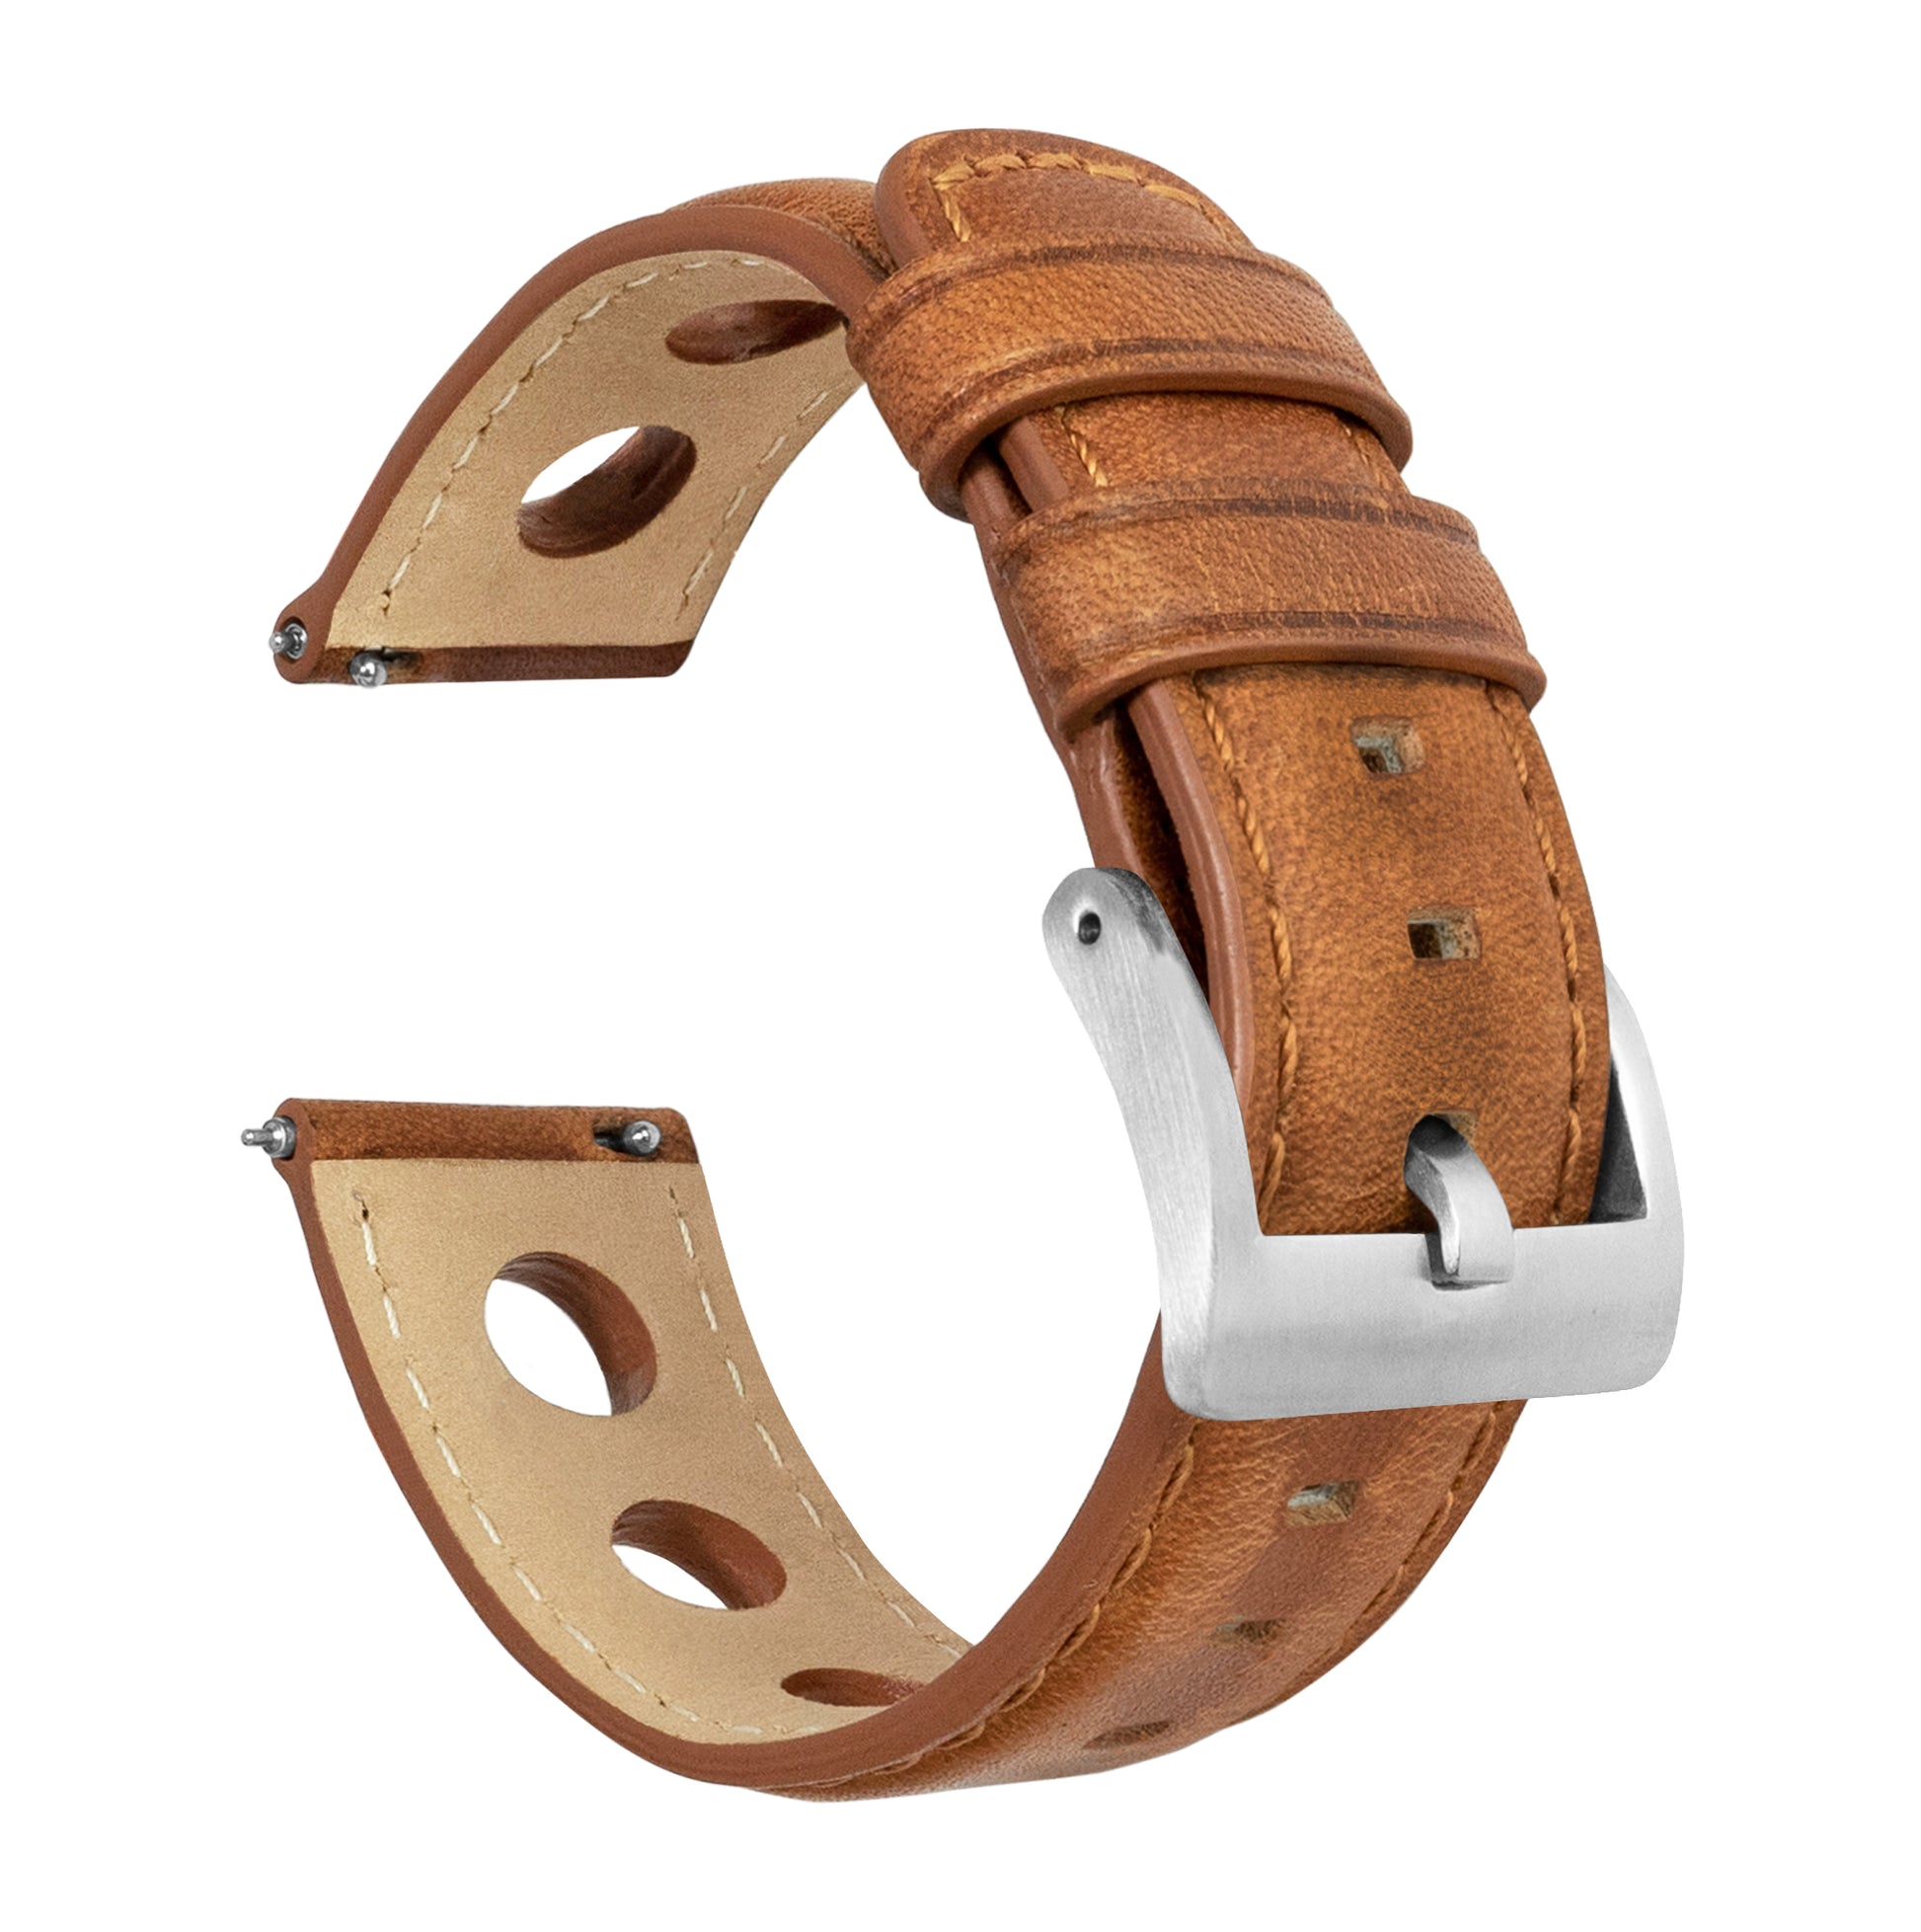 Samsung Galaxy Watch Active | Rally Horween Leather | Caramel Brown - Barton Watch Bands